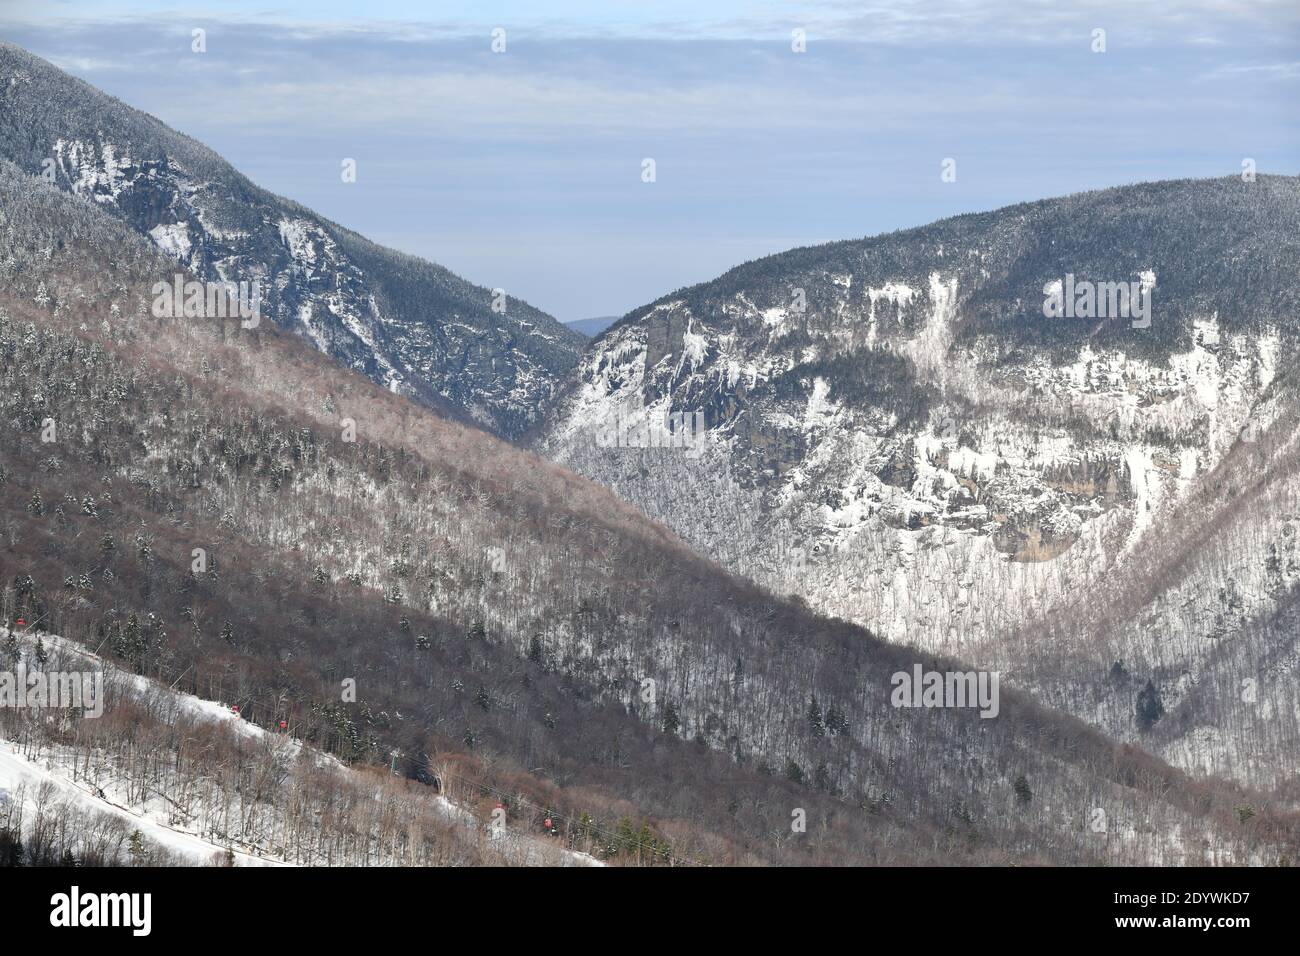 Stowe Ski Resort in Vermont, view to the the Smugglers Notch pass, December fresh snow on trees early season in VT, panoramic hi-resolution image Stock Photo